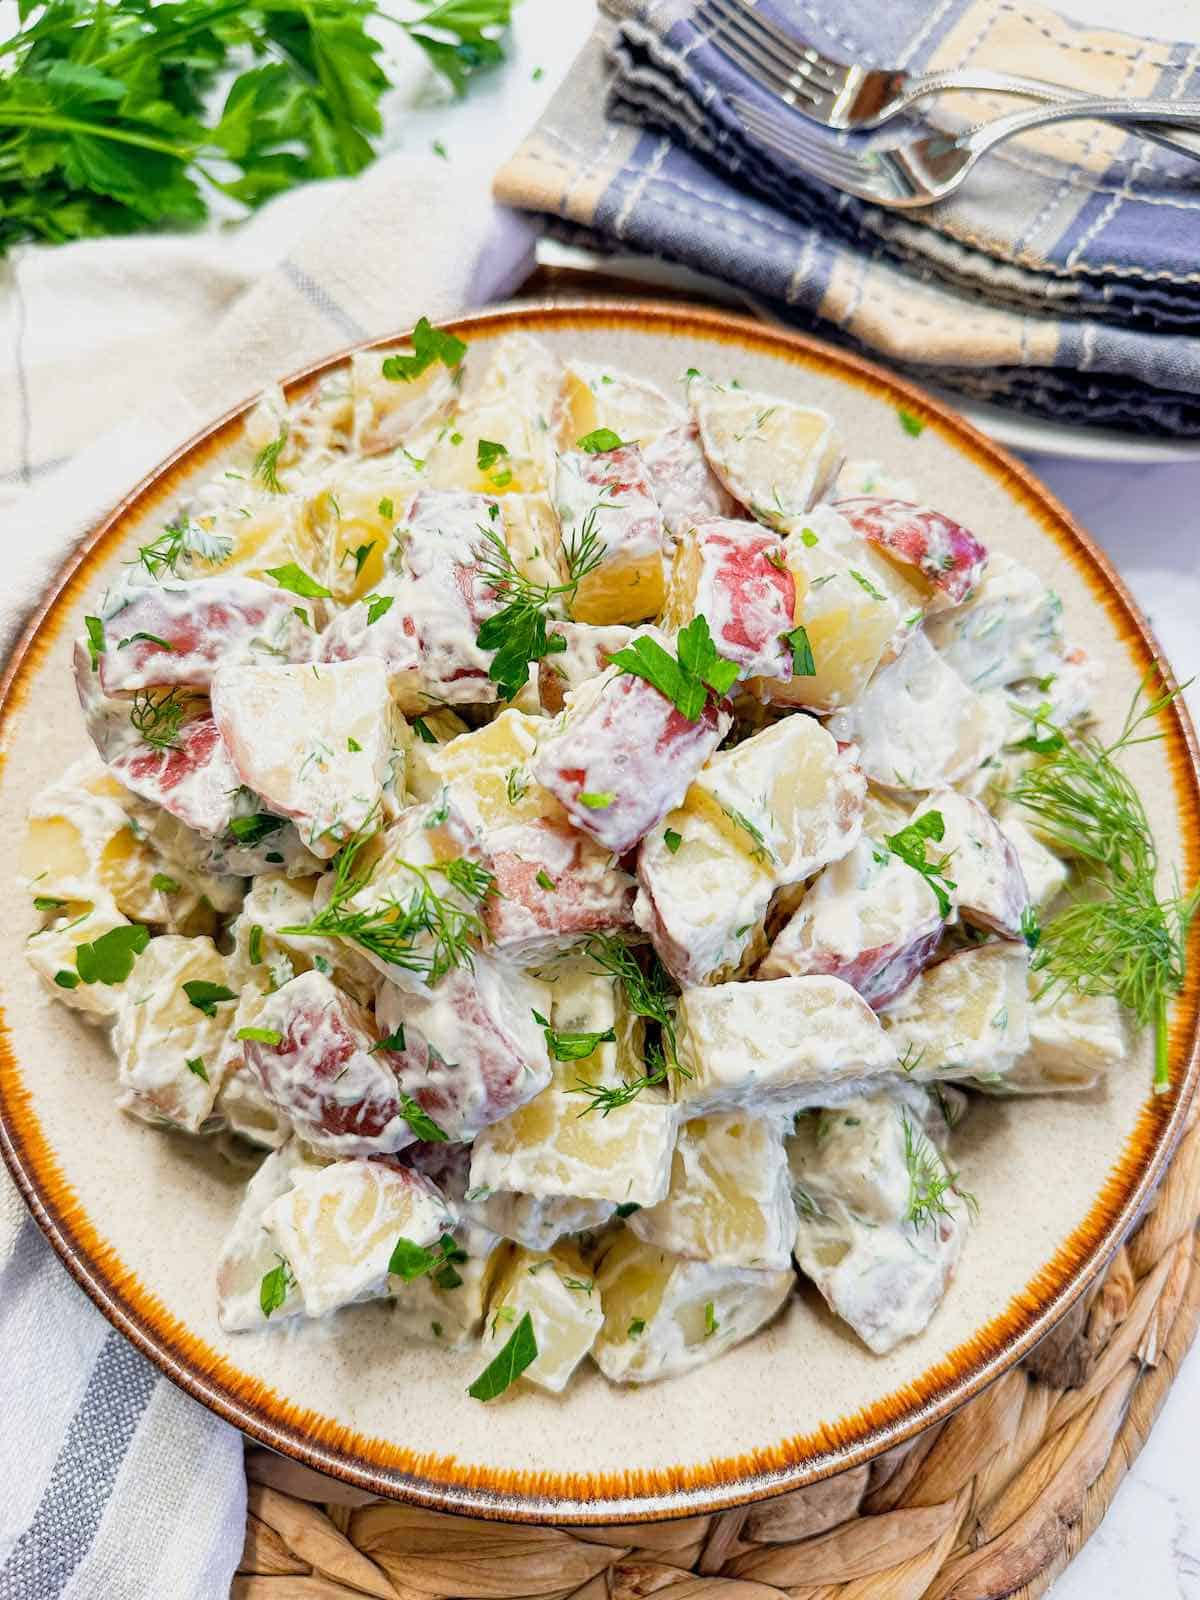 A large bowl of red potato salad topped with fresh dill fronds and chopped parsley.